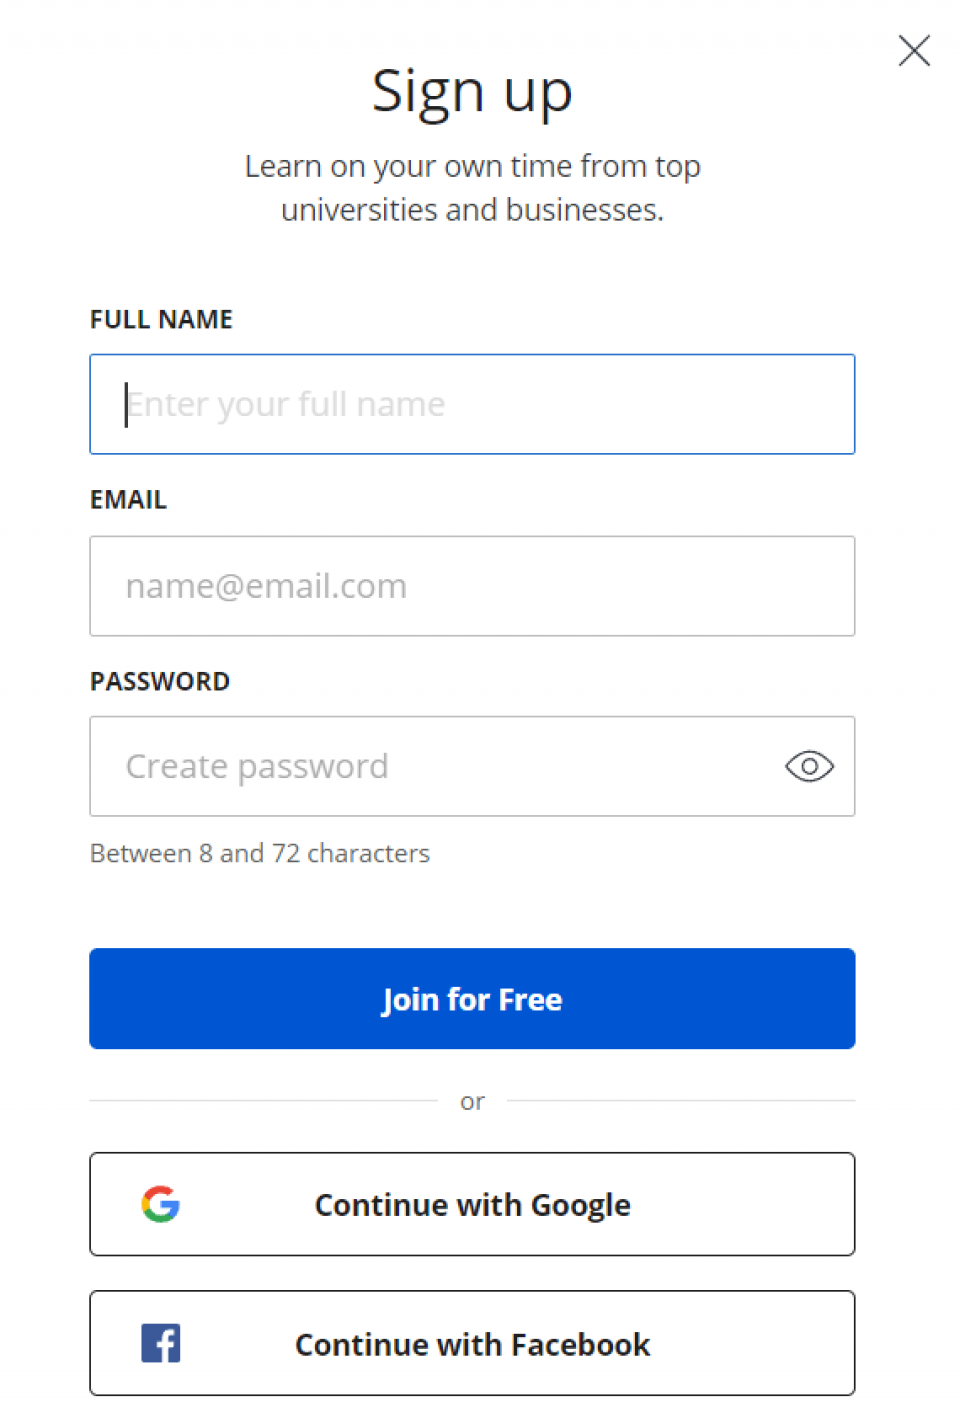 Screenshot of Coursera’s sign-up form.